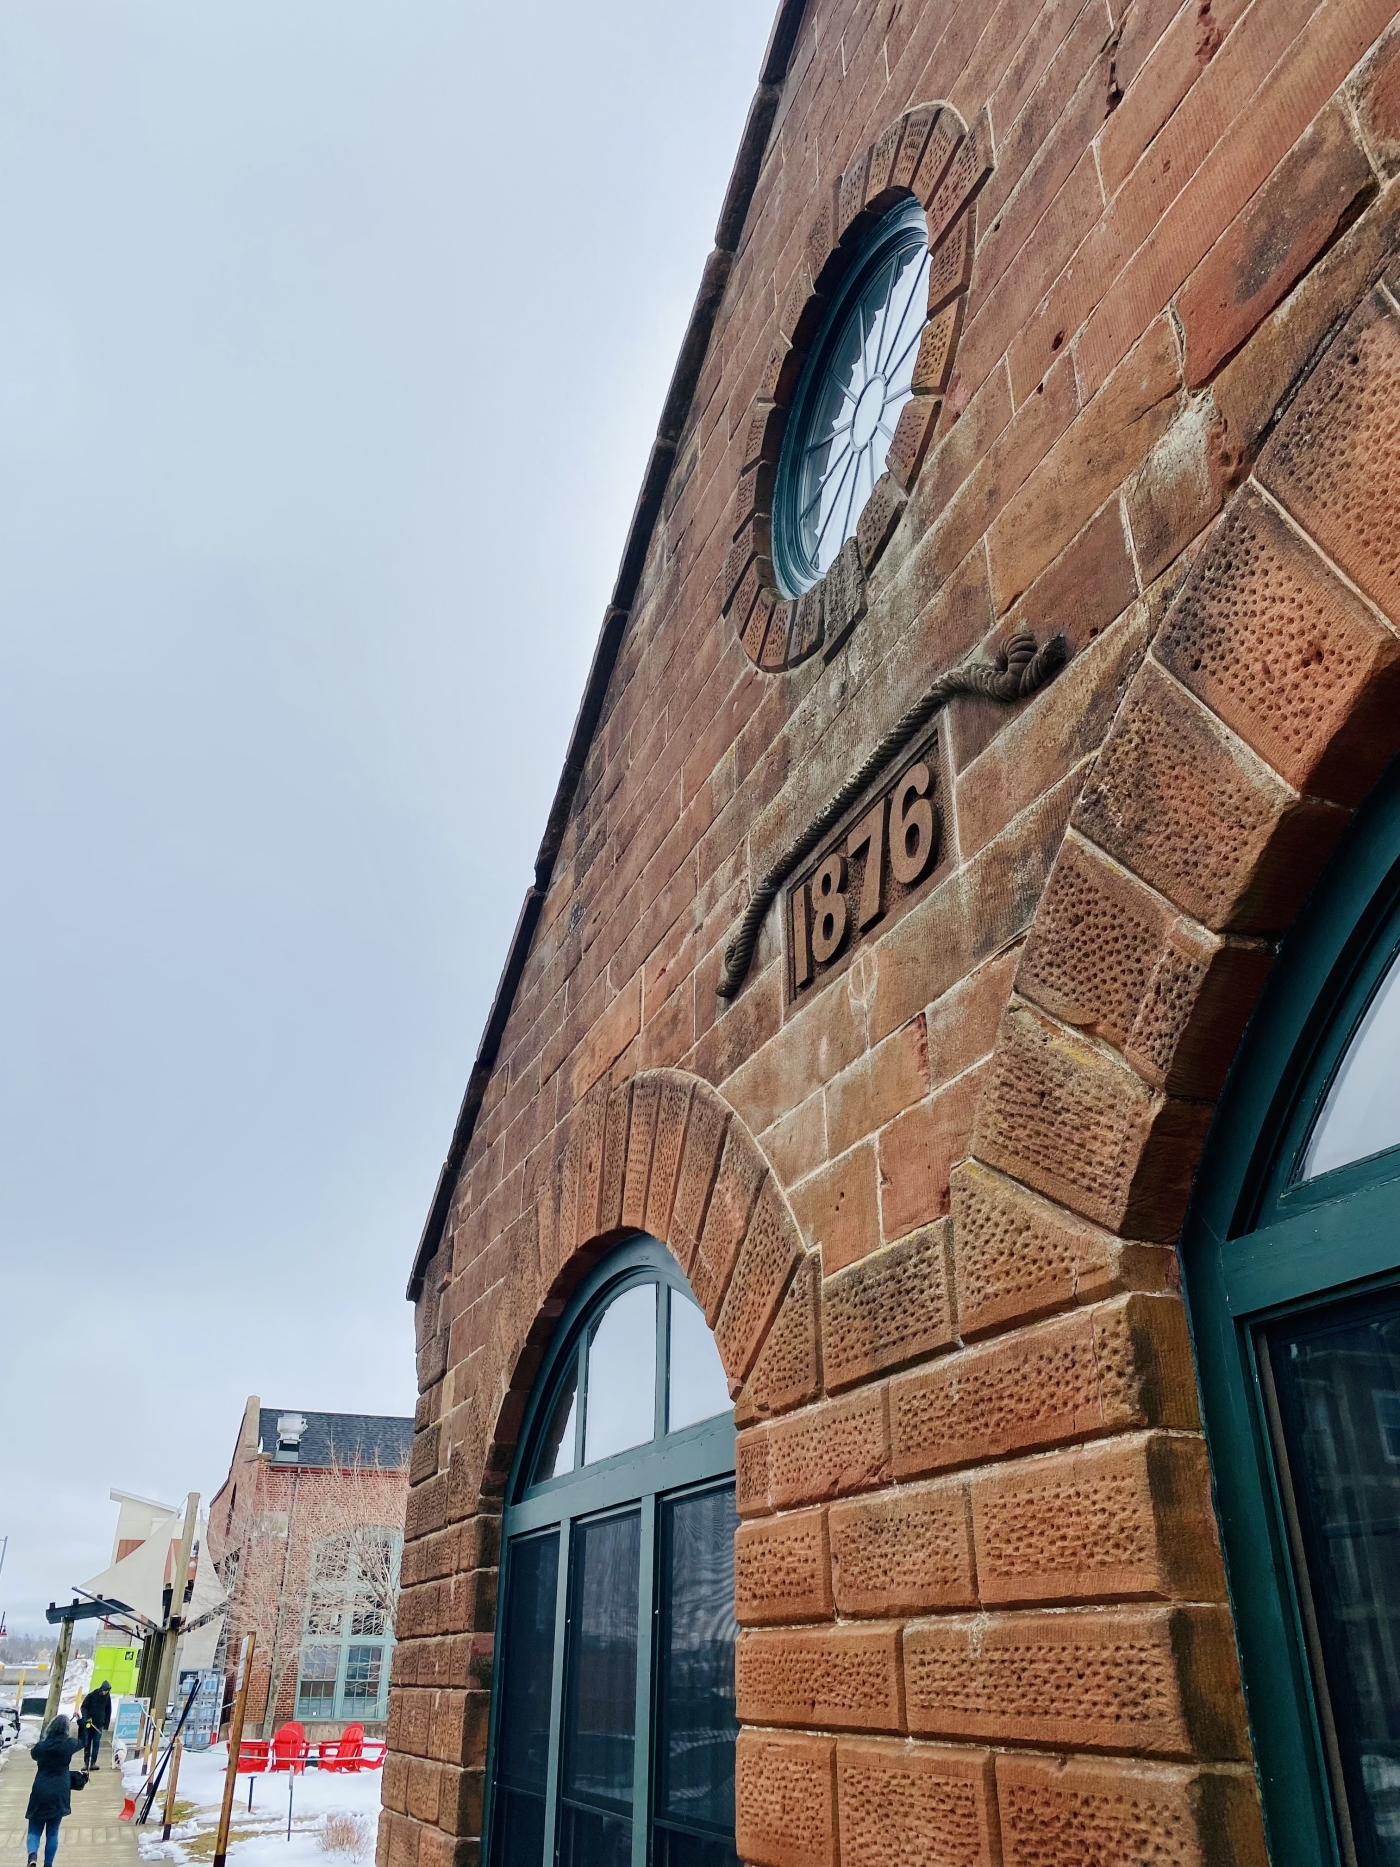 Exterior of the PEI Railway Brass House, home of Receiver Coffee, that show cornerstone of 1876